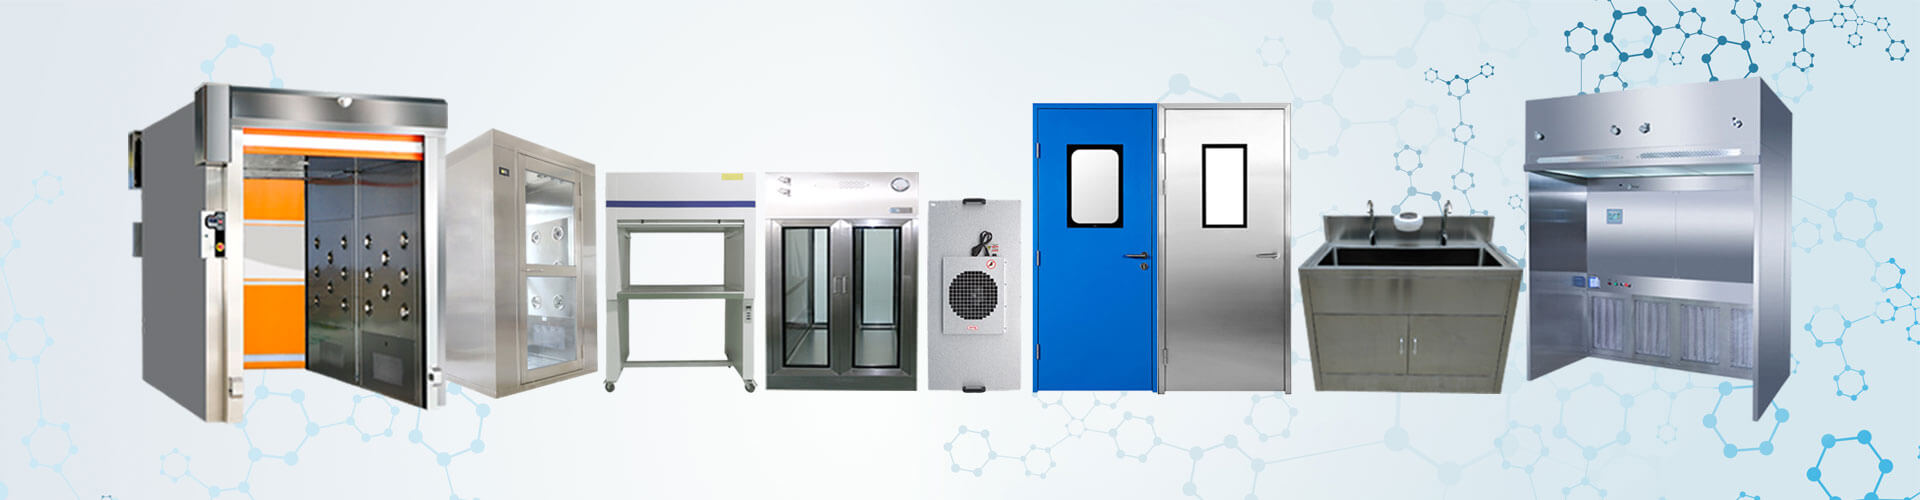 Cleanroom Equipment Manufacturer, OEM and Supplier